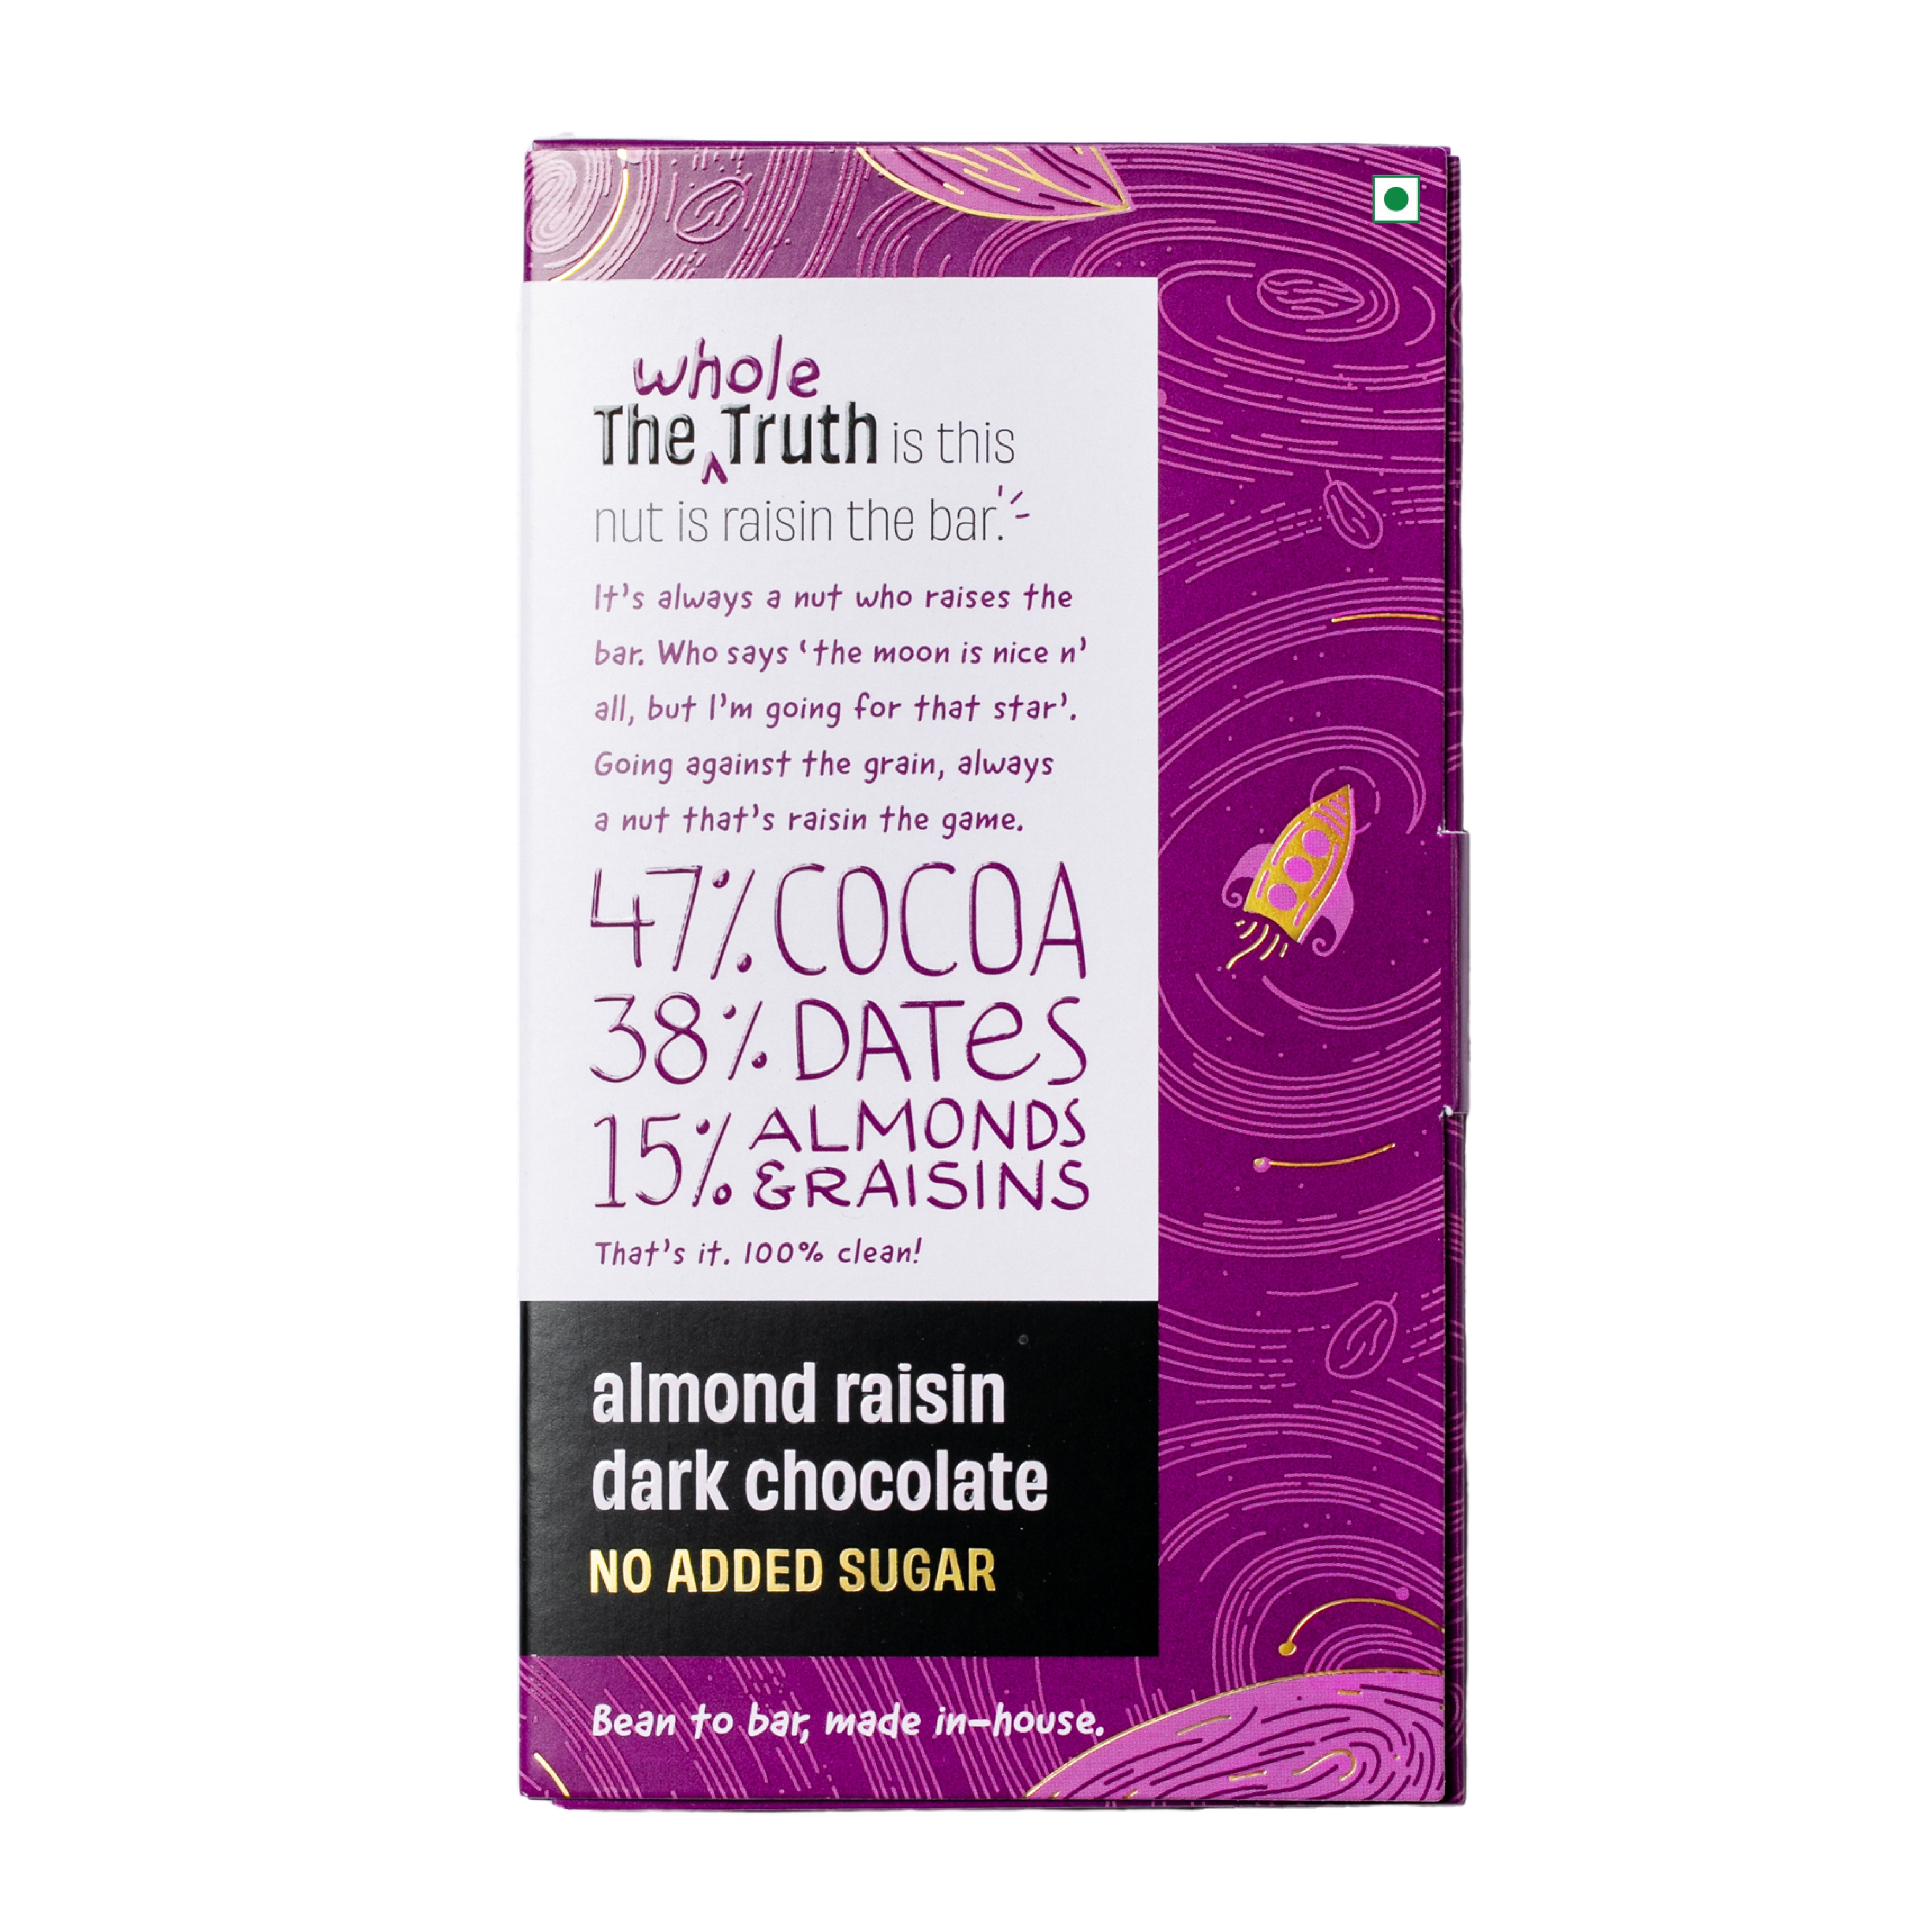 The Whole Truth Dark Chocolate | Almond Raisin | Pack of 2 | No Added Sugar, Only Dates | 47% Cocoa, 38% Dates, 15% Almond & Raisins